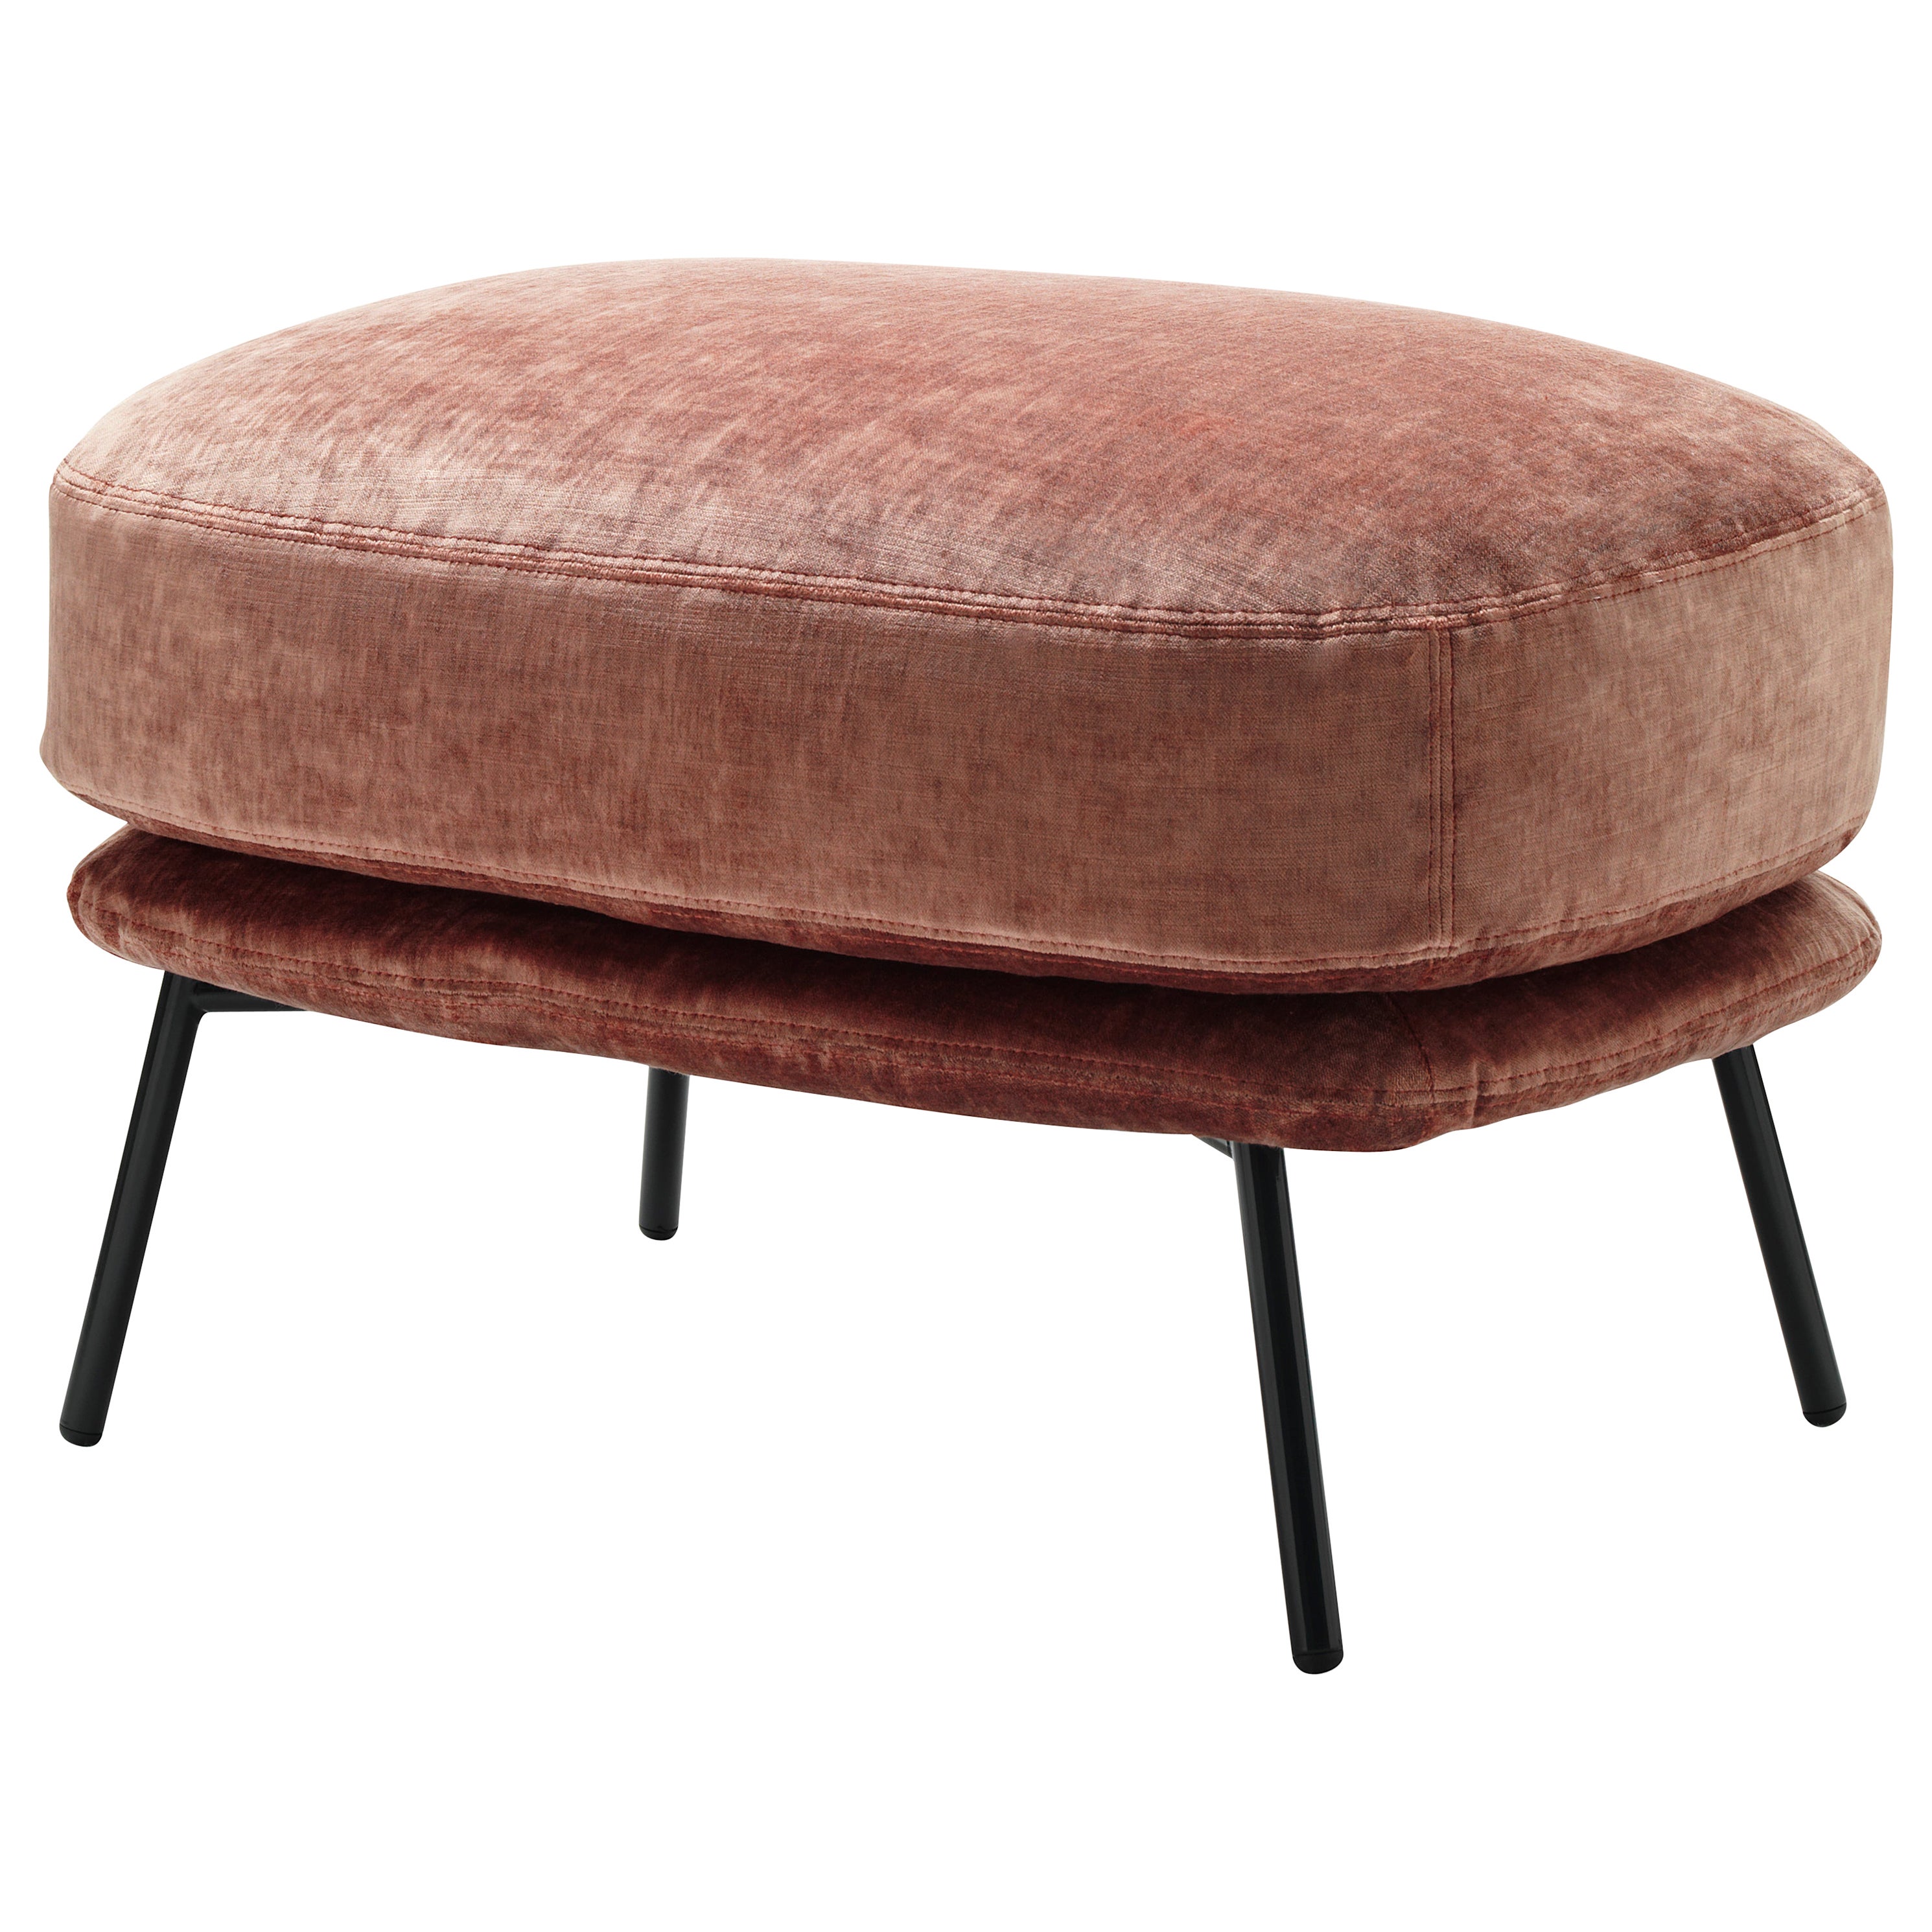 Kepi Pouf in Sweet Velvet Brown Upholstery with Grey Metal Feet by Emilio Nanni For Sale